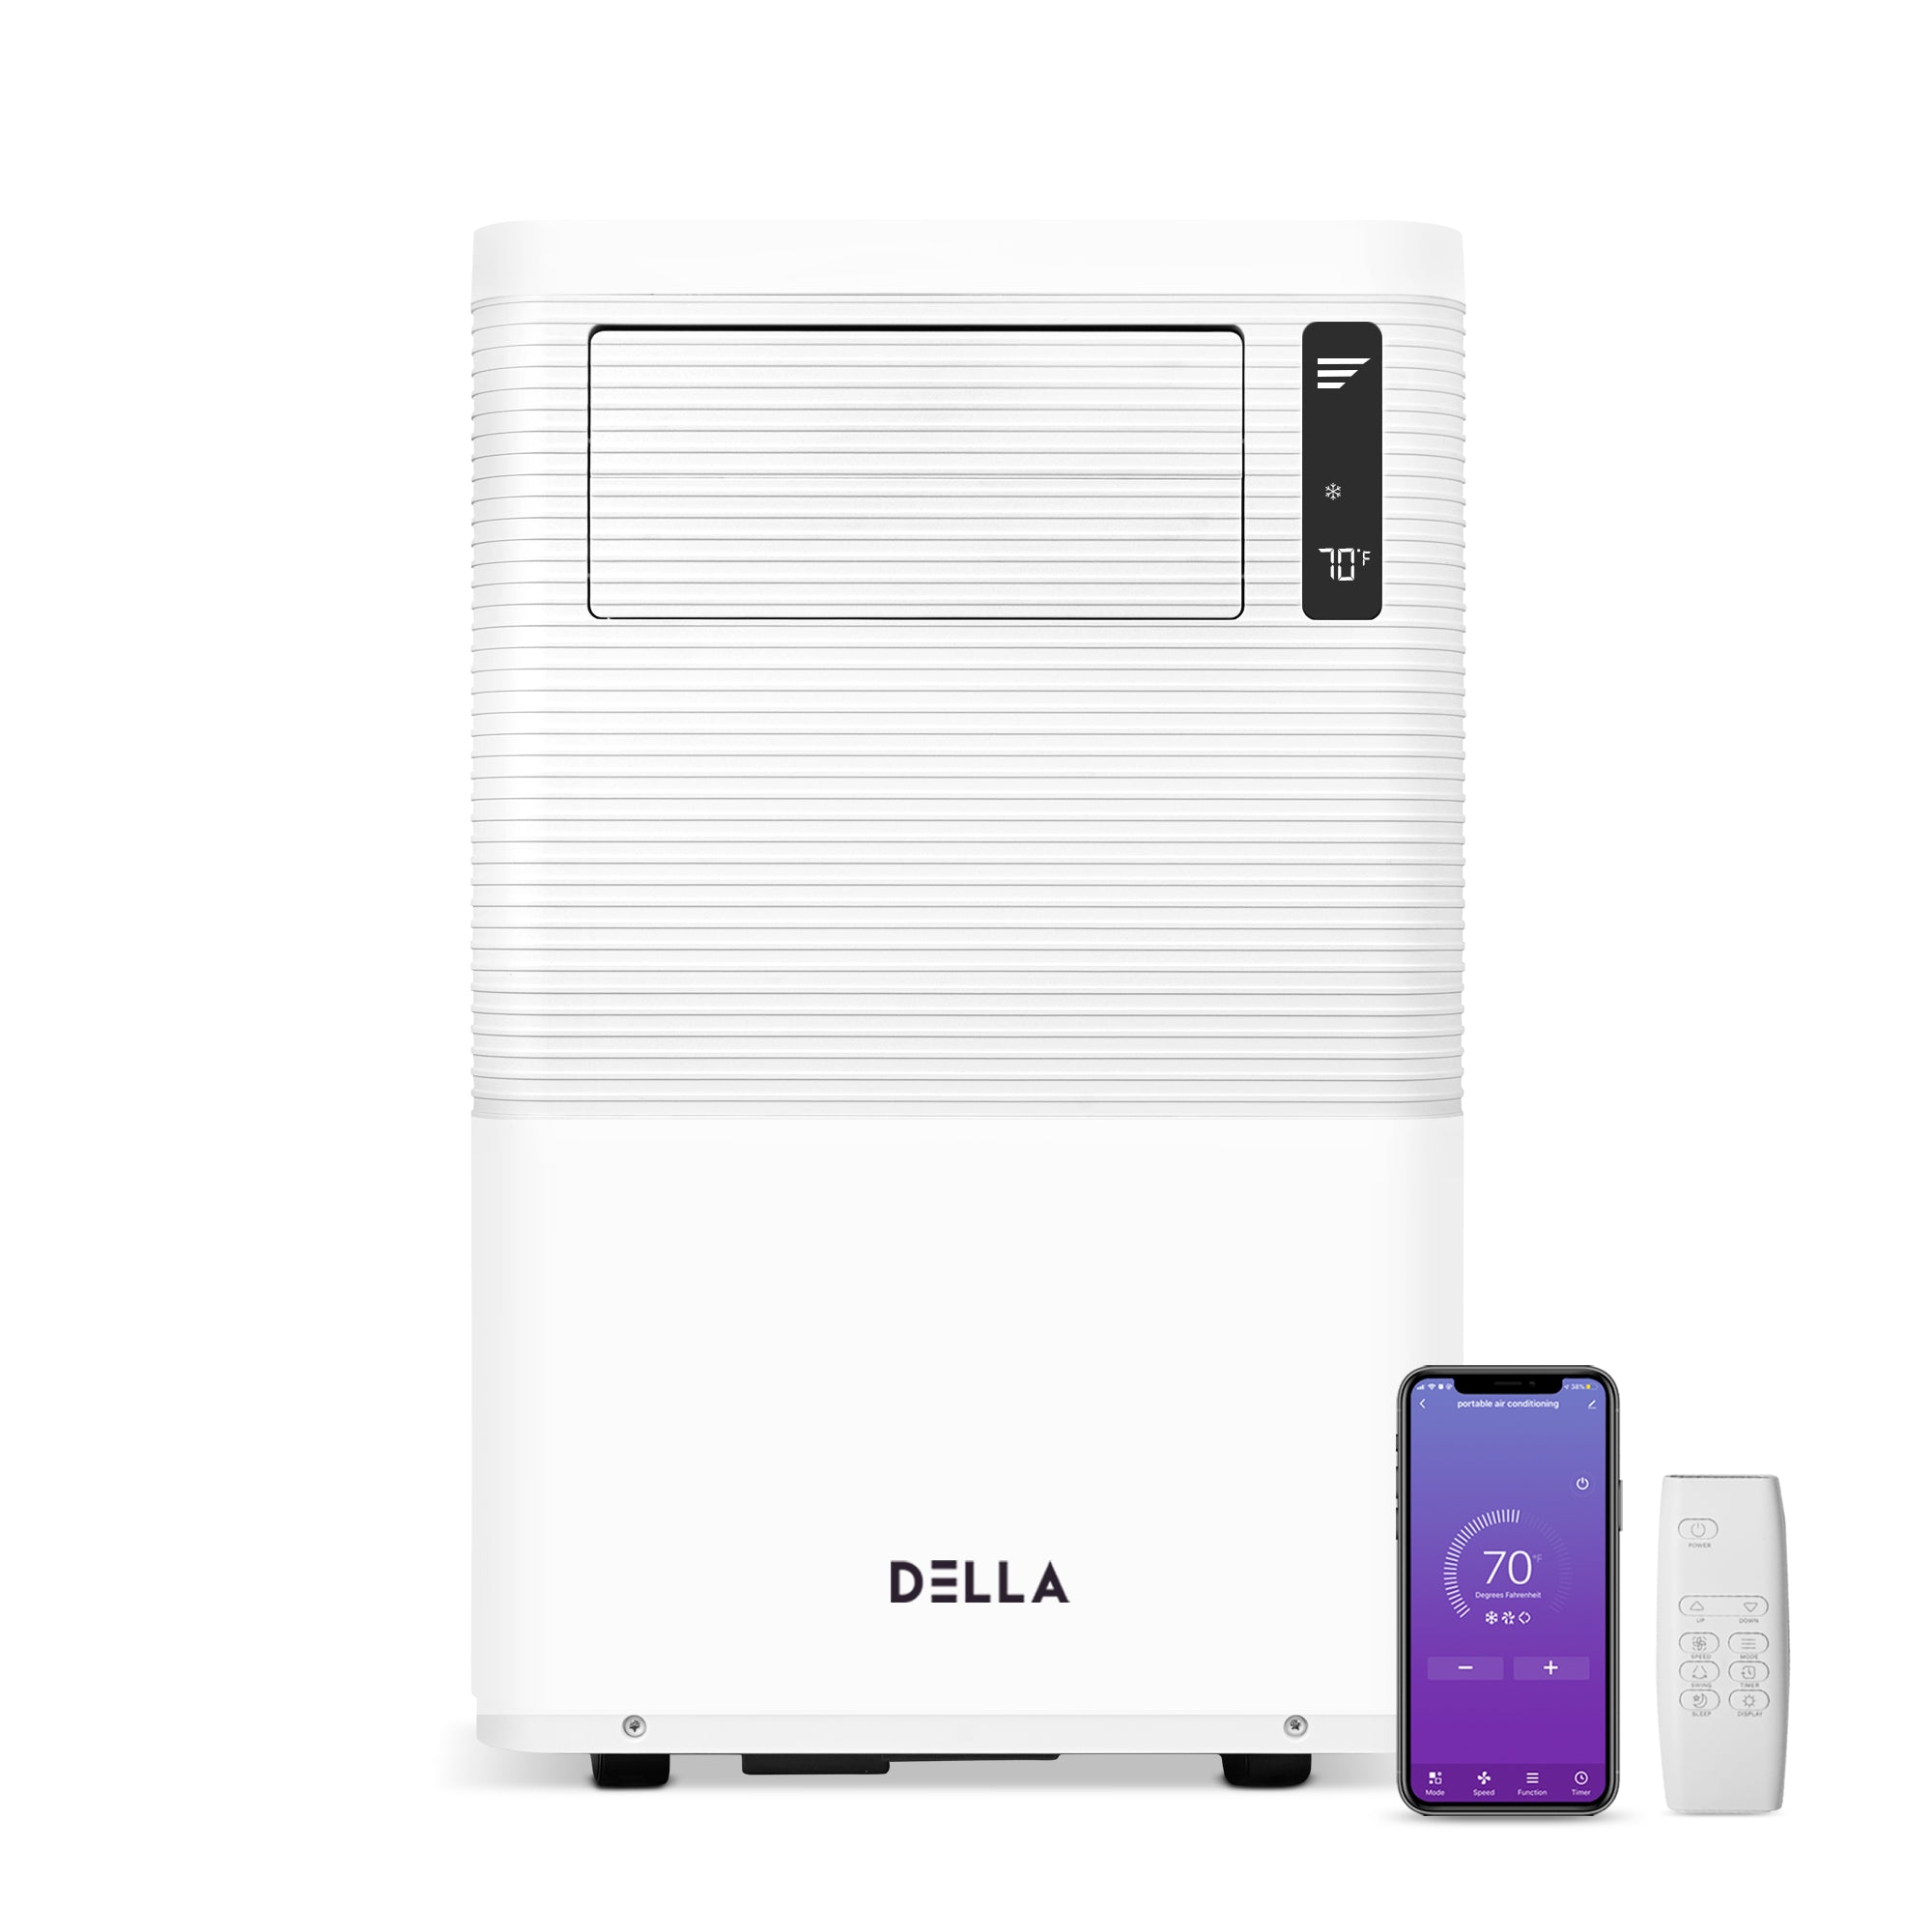 11000 BTU Smart WiFi Enabled Portable AC with Remote/App Control, Cools Up To 600 Sq. Ft.